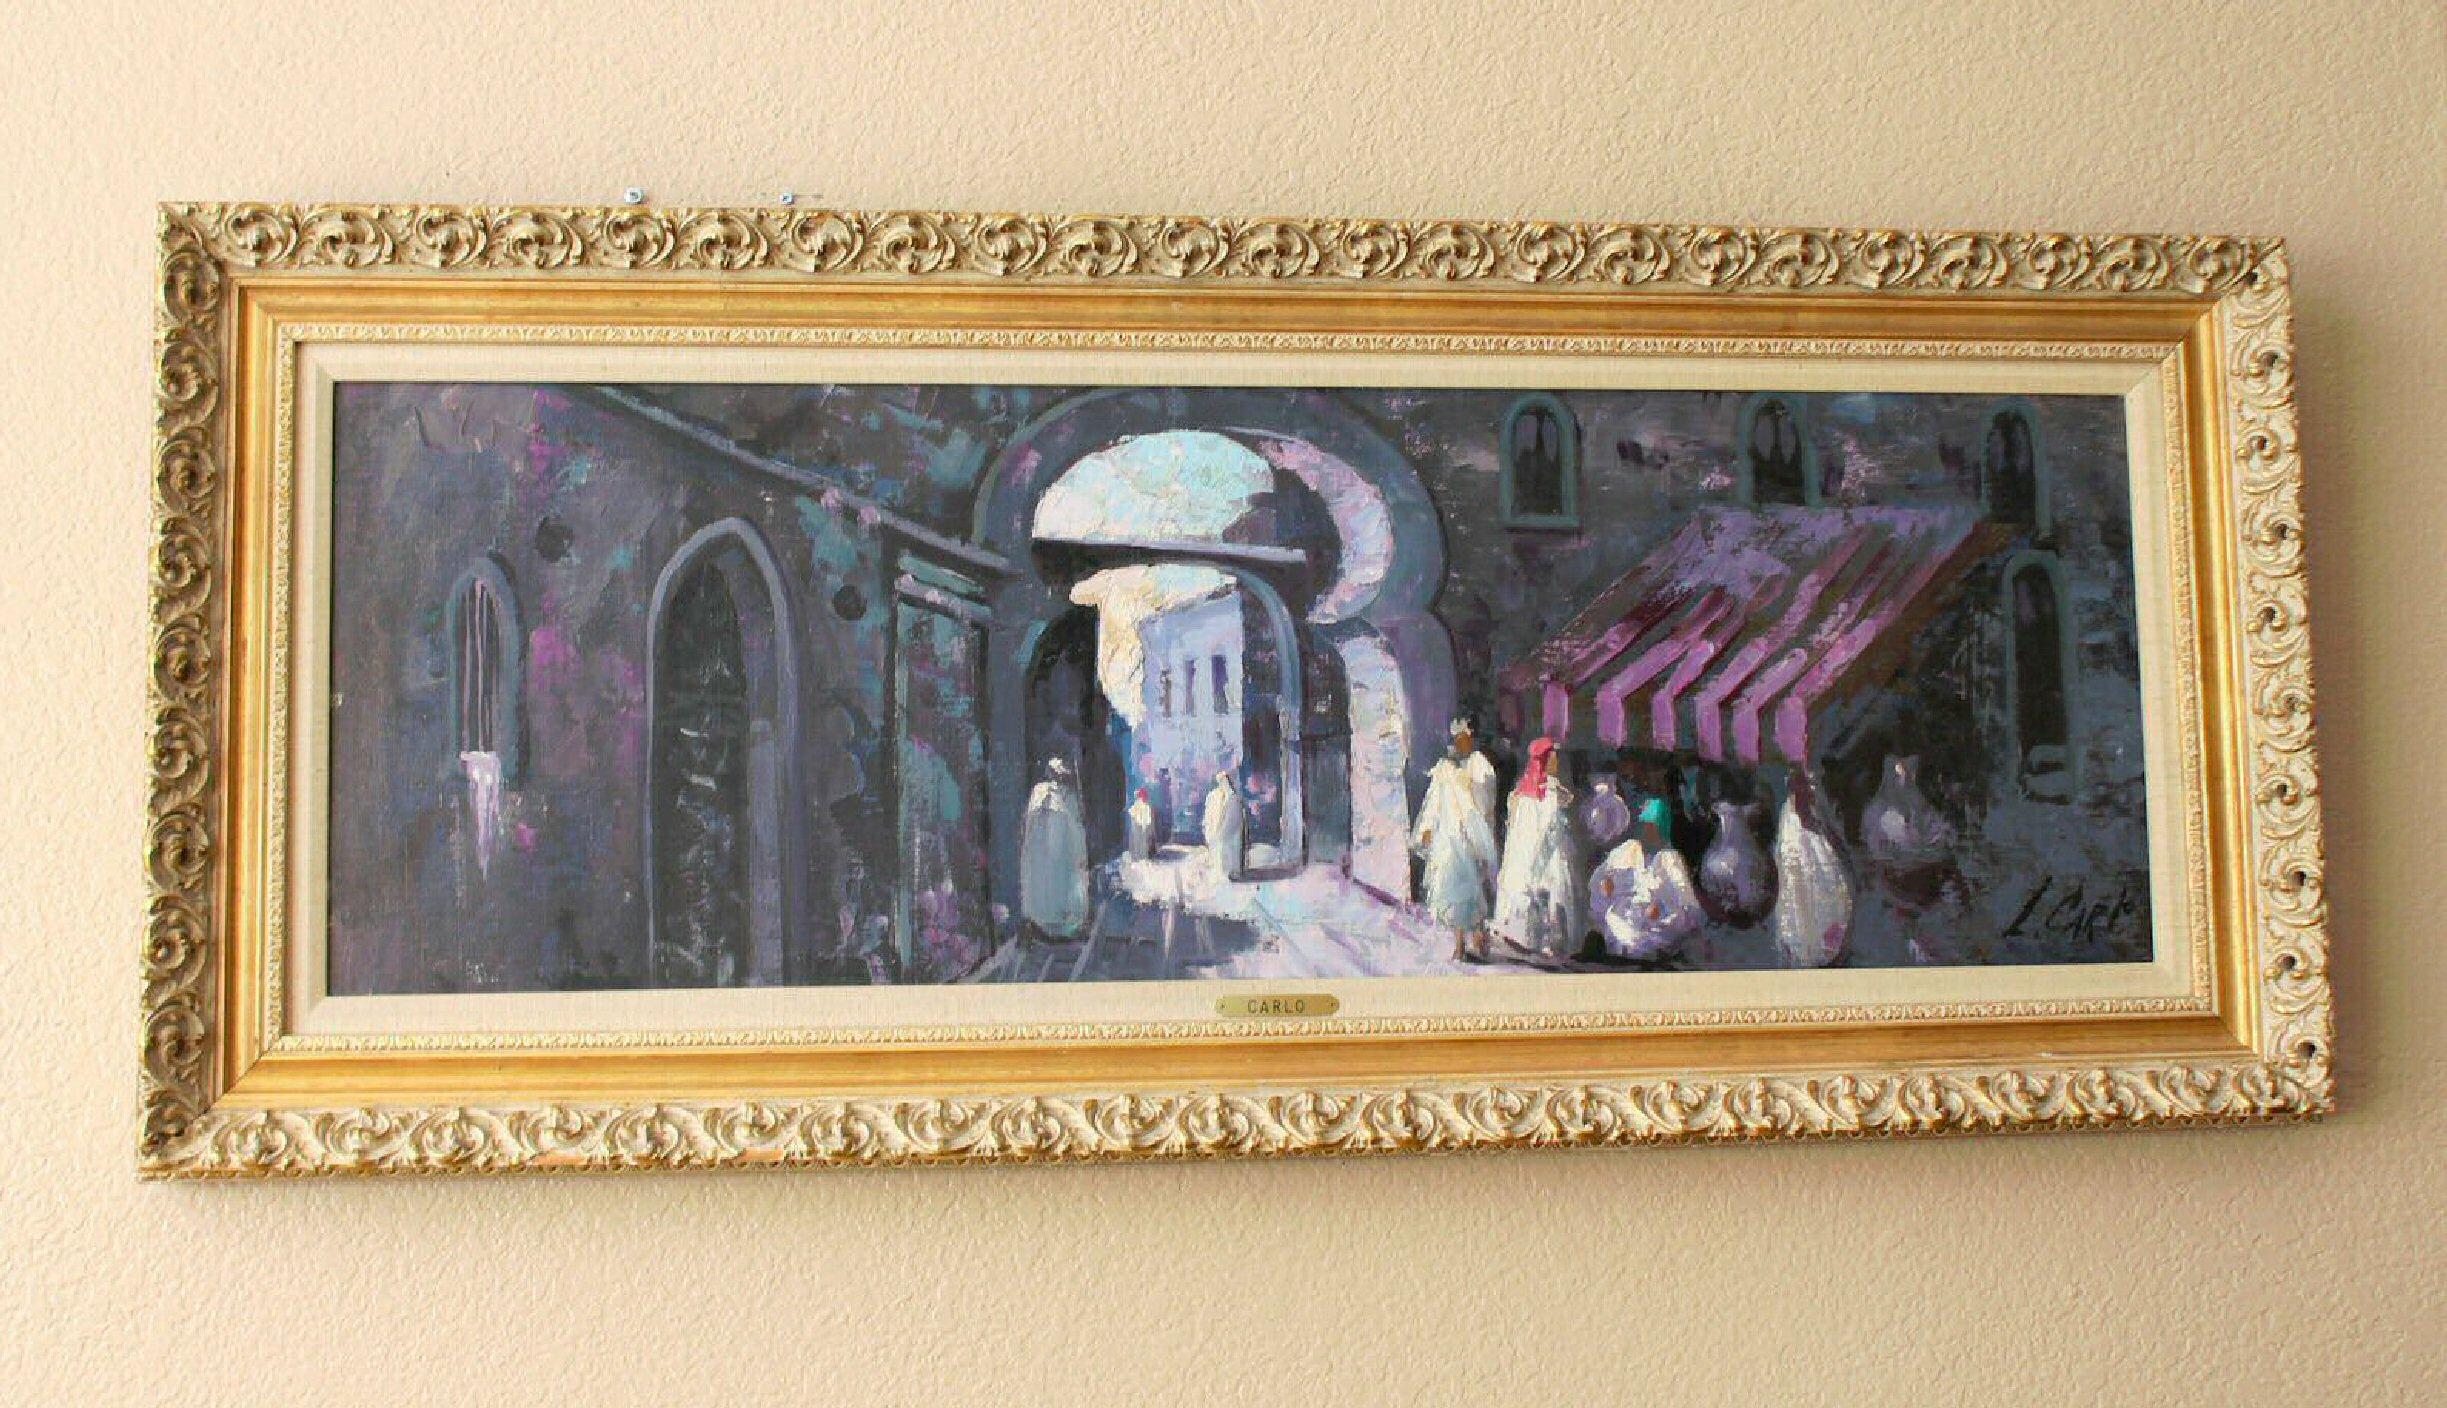 Painted Carlo of Hollywood!  Monumental Rare Original Oil Painting Arab Market 1950s Art For Sale